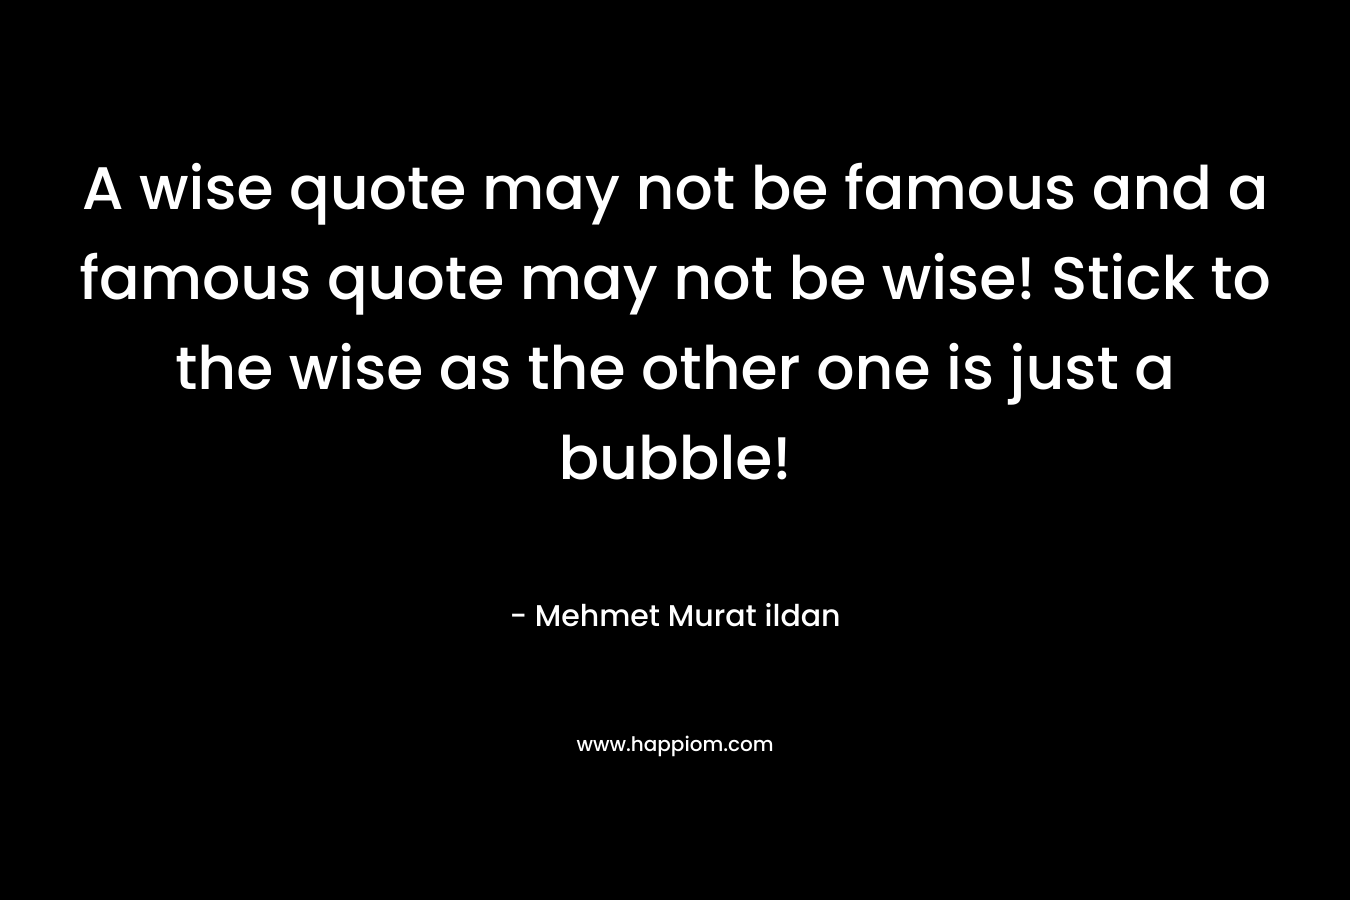 A wise quote may not be famous and a famous quote may not be wise! Stick to the wise as the other one is just a bubble!